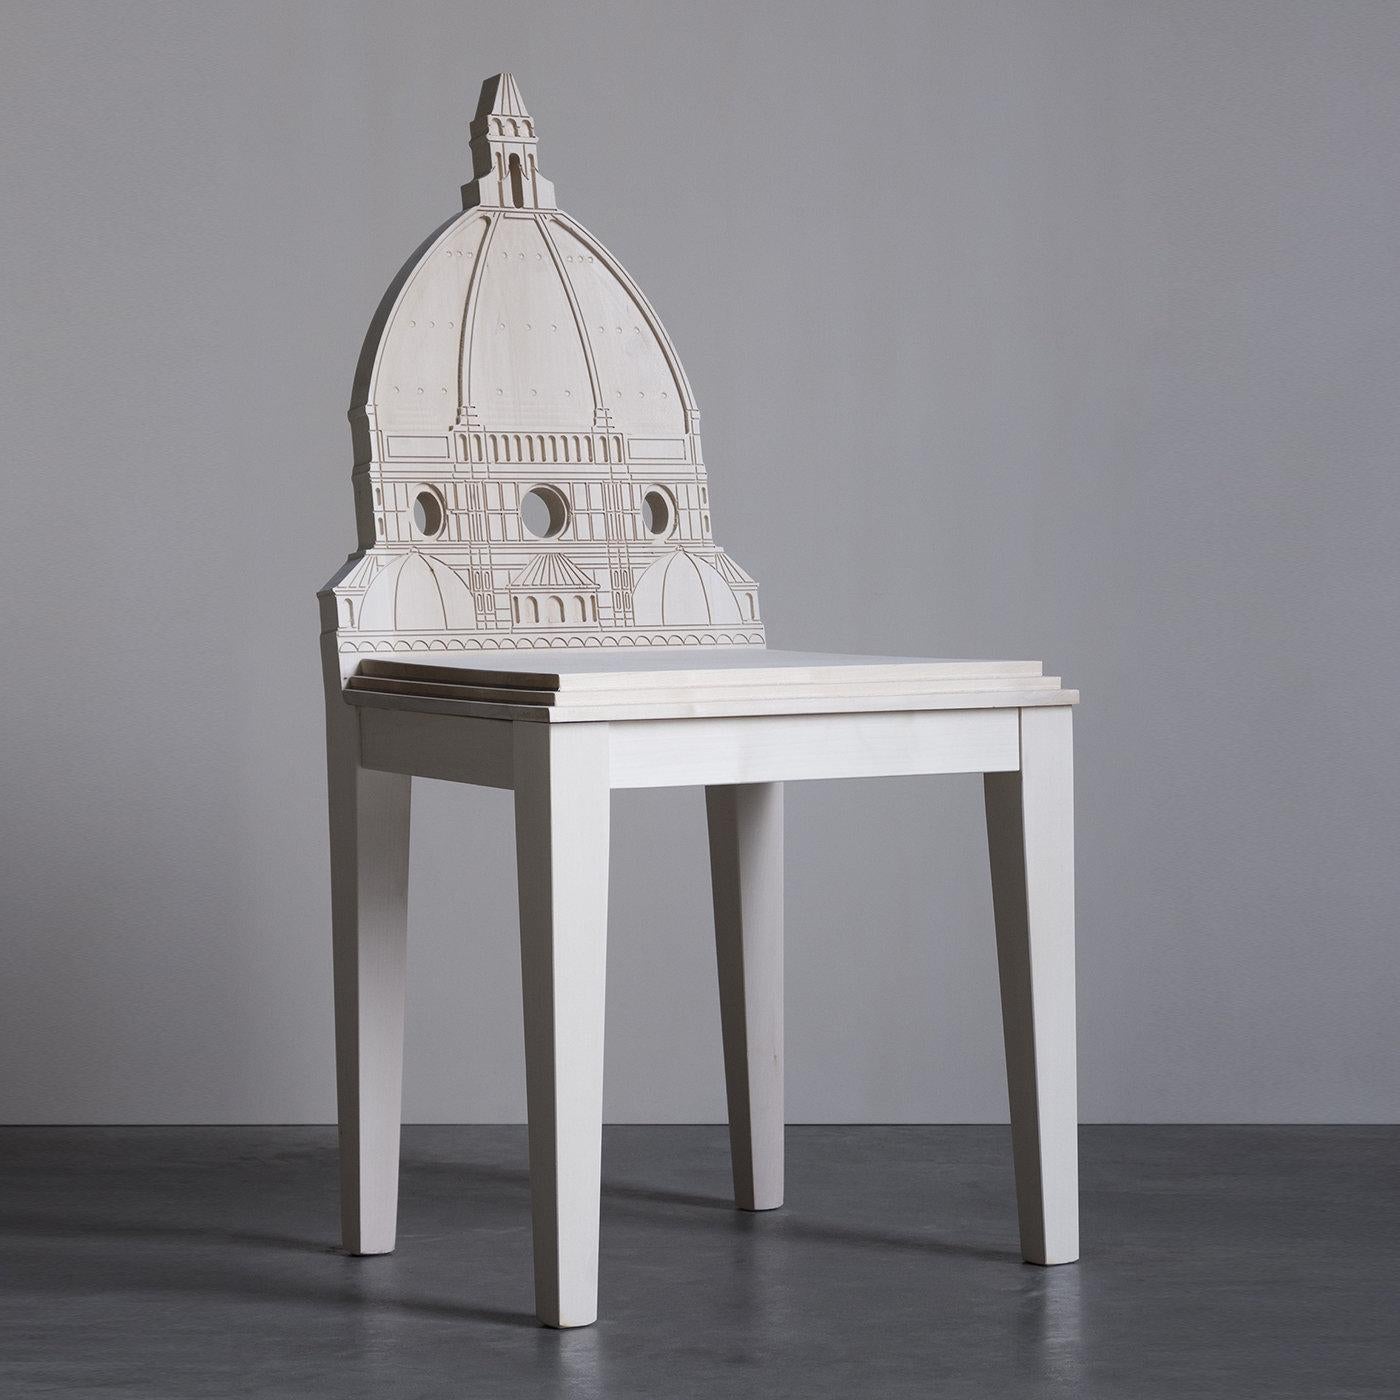 A stunning tribute to the majestic Santa Maria del Fiore Church of Florence by Italian Renaissance artists Filippo Brunelleschi and Arnolfo Di Cambio, this chair is a singular and charming objet d'art created by Cosimo De Vita for his exclusive